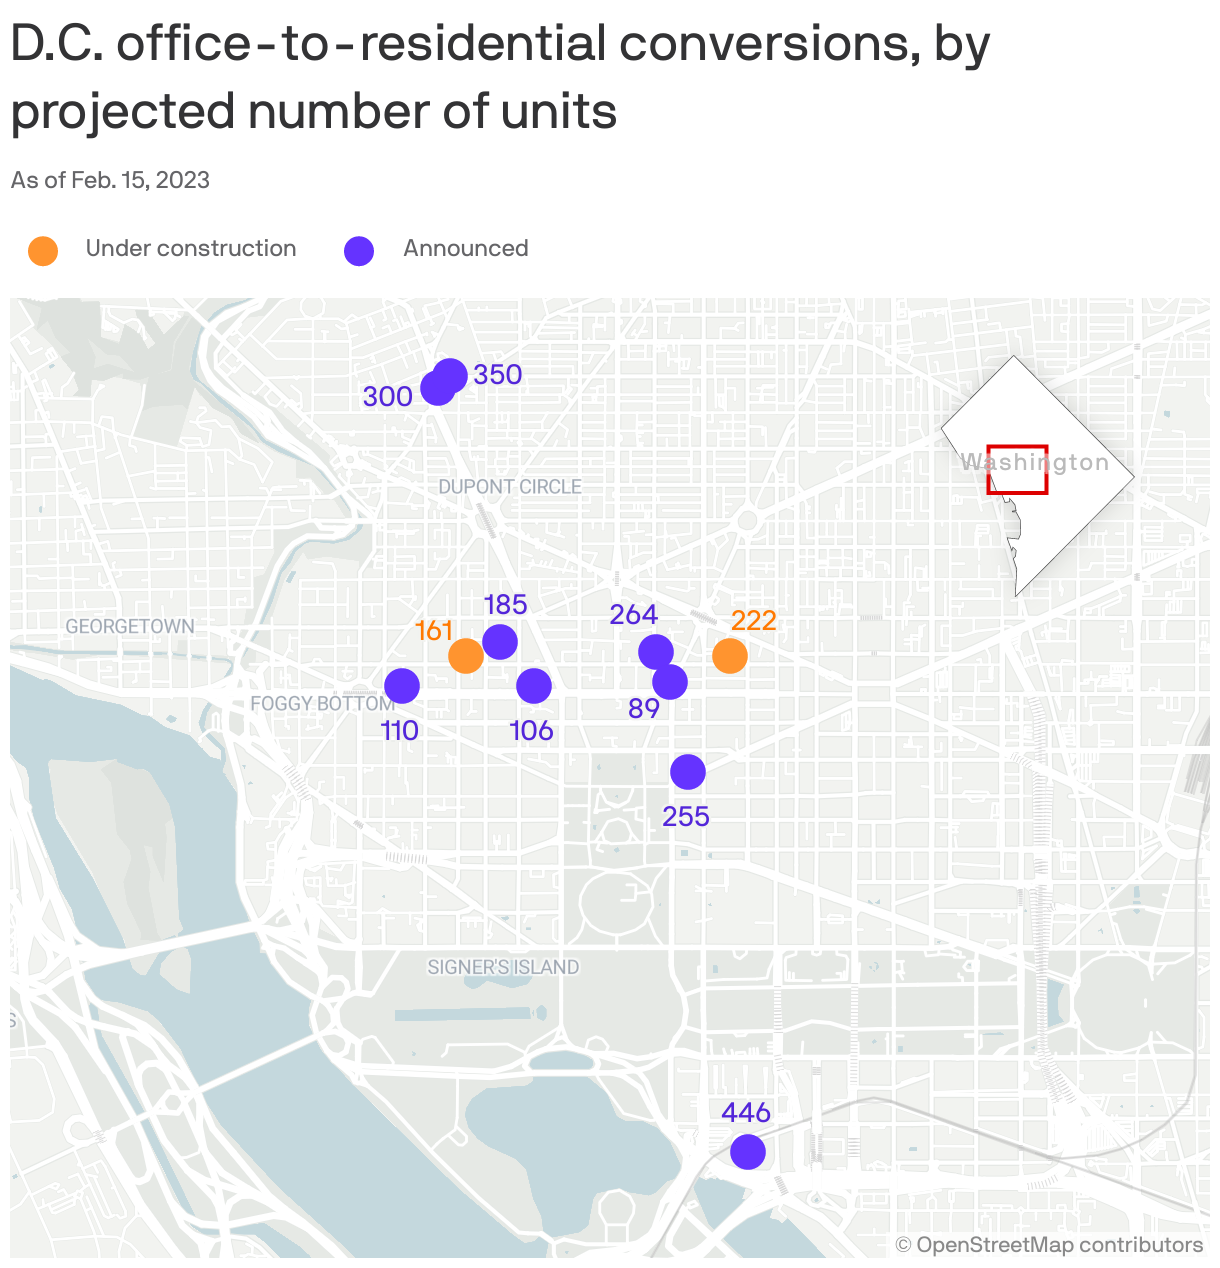 D.C. office-to-residential conversions, by projected number of units